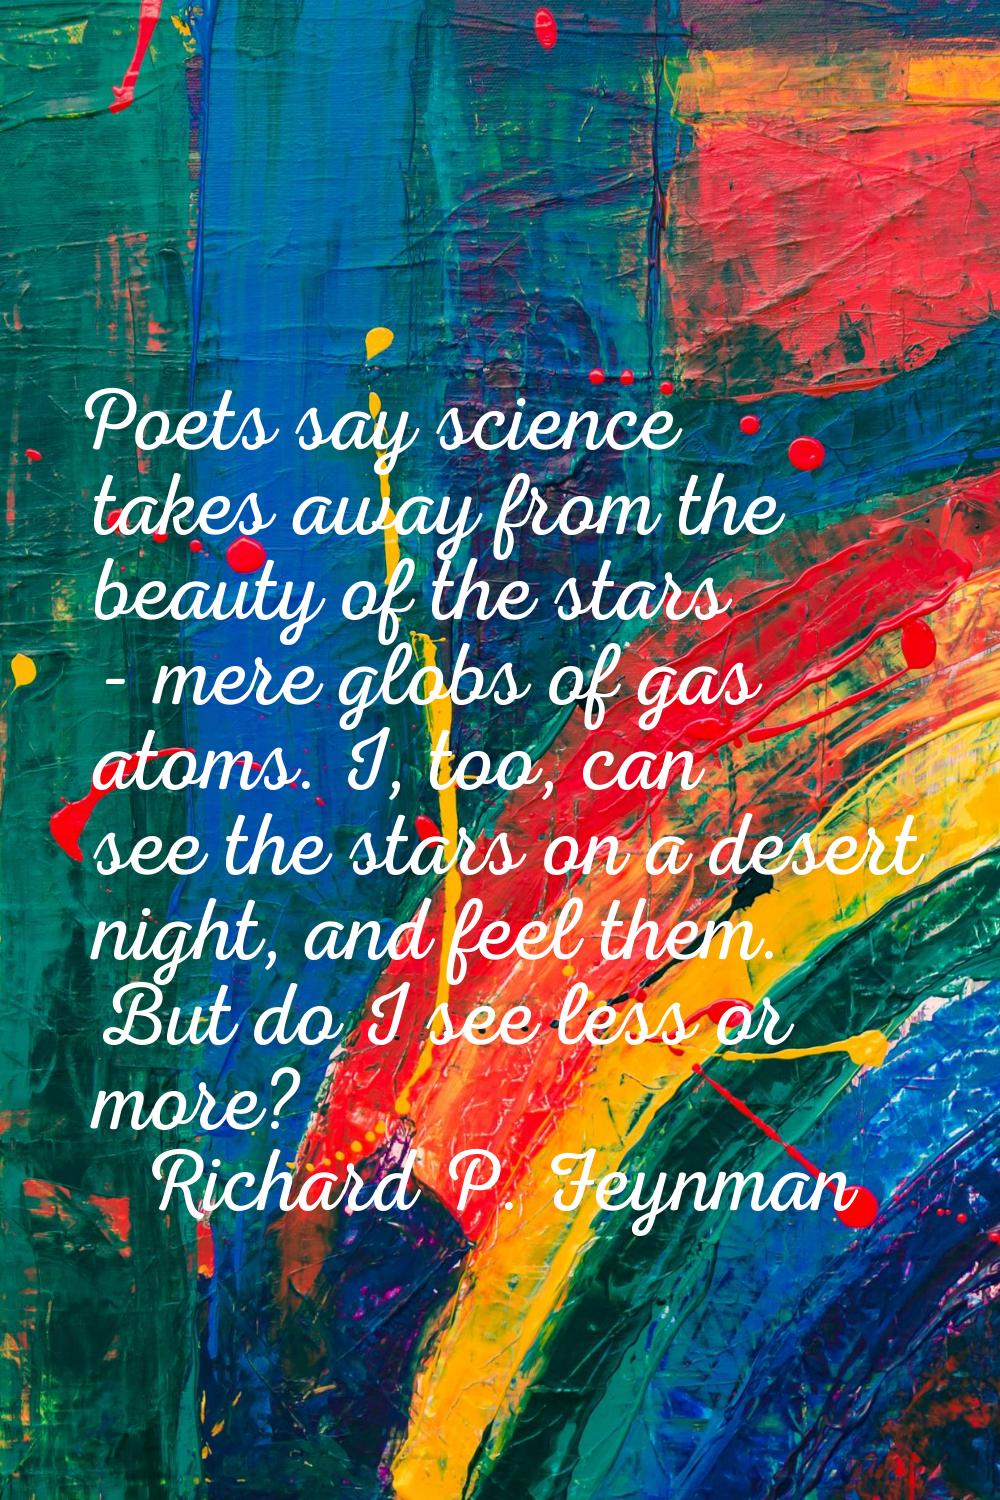 Poets say science takes away from the beauty of the stars - mere globs of gas atoms. I, too, can se